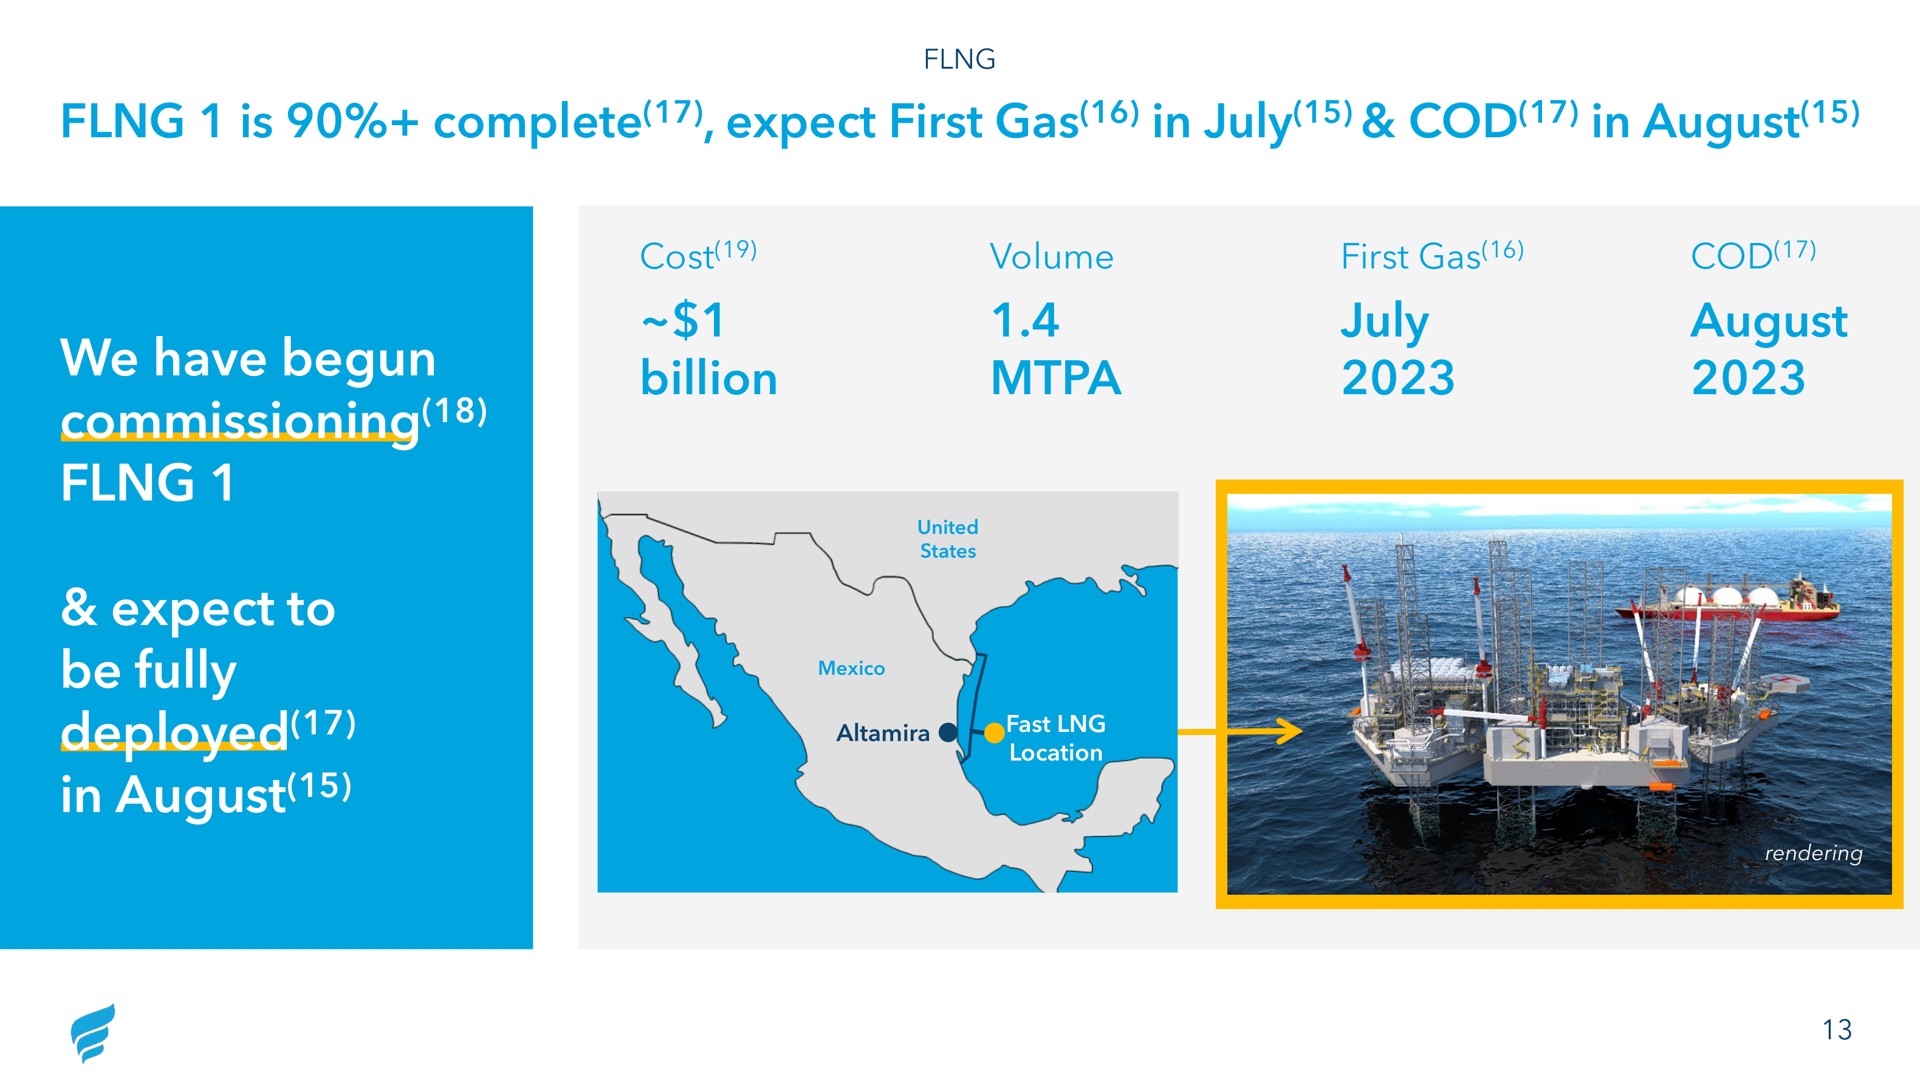 is complete expect first gas in cod in august we have begun commissioning expect to be fully deployed in august billion volume first gas august ing cost | NewFortress Energy